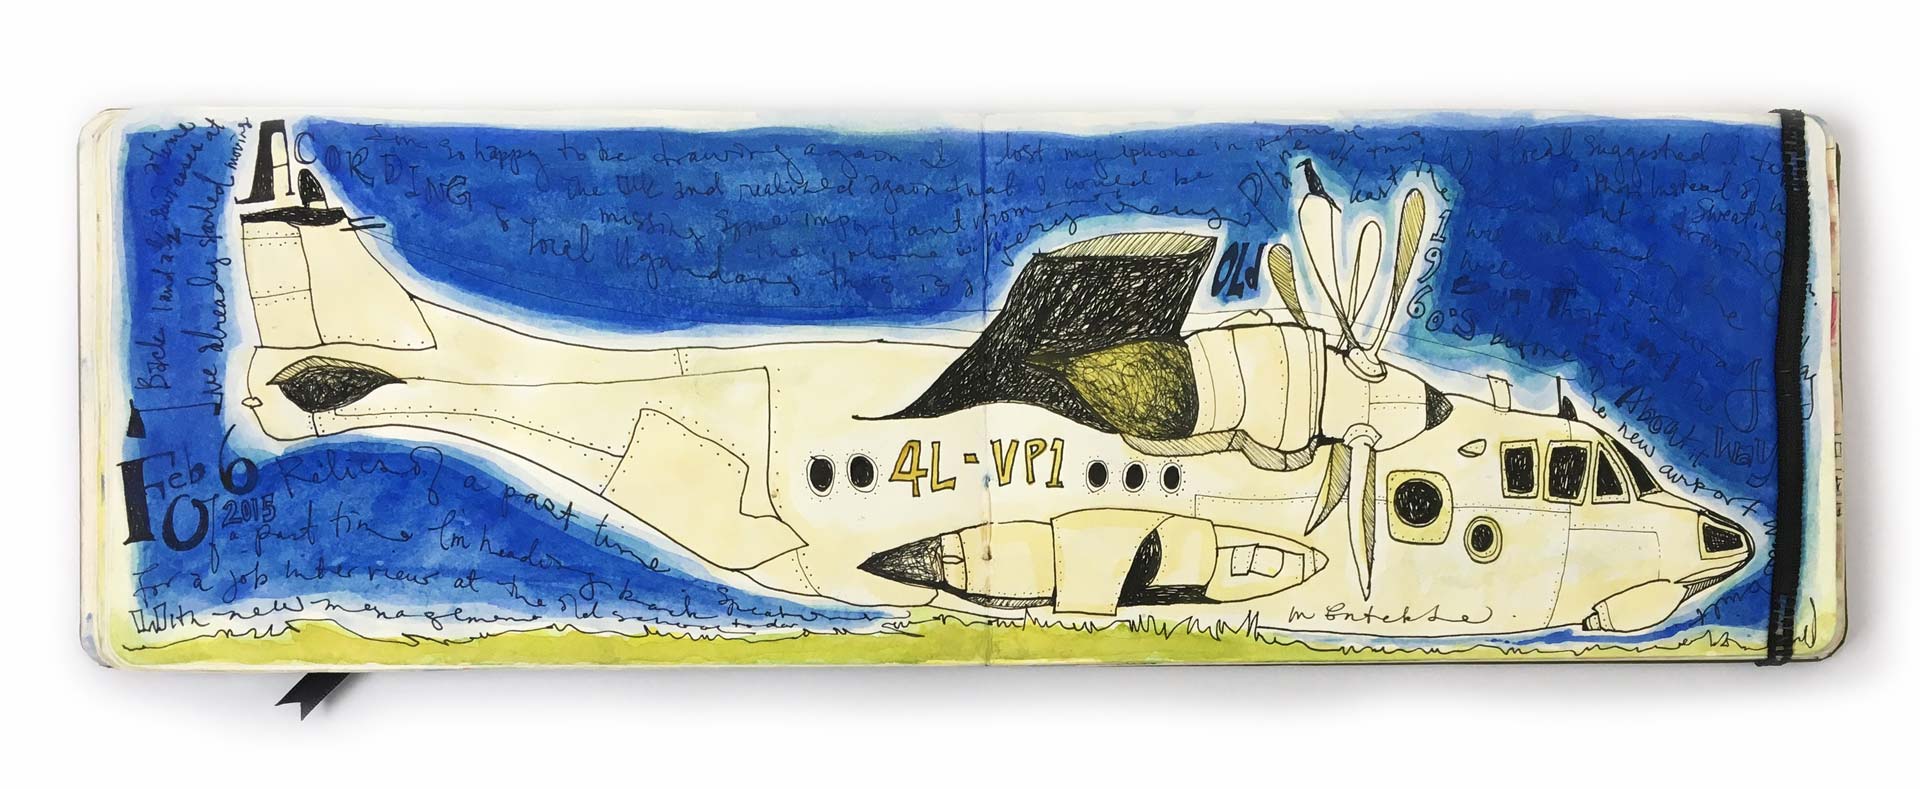 A very old plane illustrated with ink and watercolour, sketchbook.